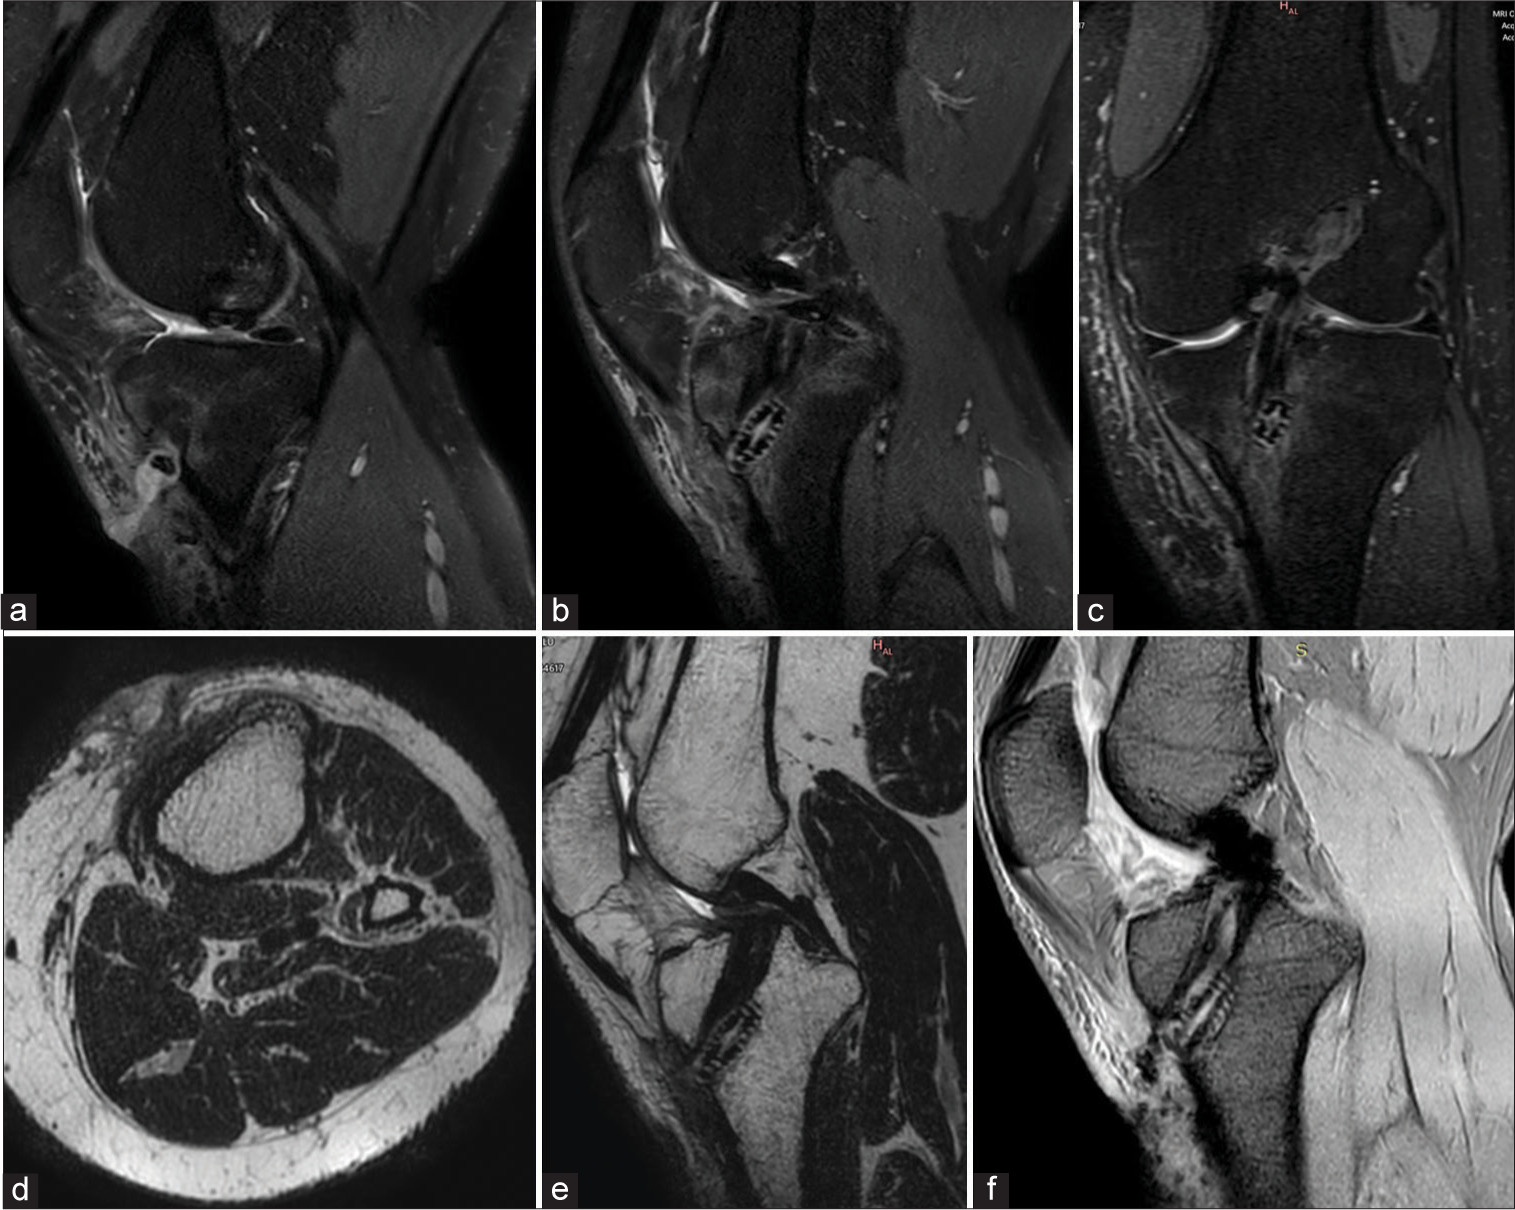 Same Patient as Image 8. Status post-double bundle anterior cruciate ligament repair. The patient presented with discharging sinus in the proximal leg. (a) Proton density fat-saturated sequence extreme sagittal and (b) midsagittal images show a hyperintense track in the soft tissues anterior to the tibia extending up to the dermis with marrow edema in the tibia. Soft-tissue edema is also seen in the soft tissues anteriorly and medially (c) on the coronal images. (d) Axial T2W image at the level of the tibia showing the track in the subcutaneous planes breaches the skin. (e) Corresponding Midsagittal T2W image. (f) Gradient echo sequences mid sagittal image showing foci of blooming in the intercondylar region and pretibial soft tissues.